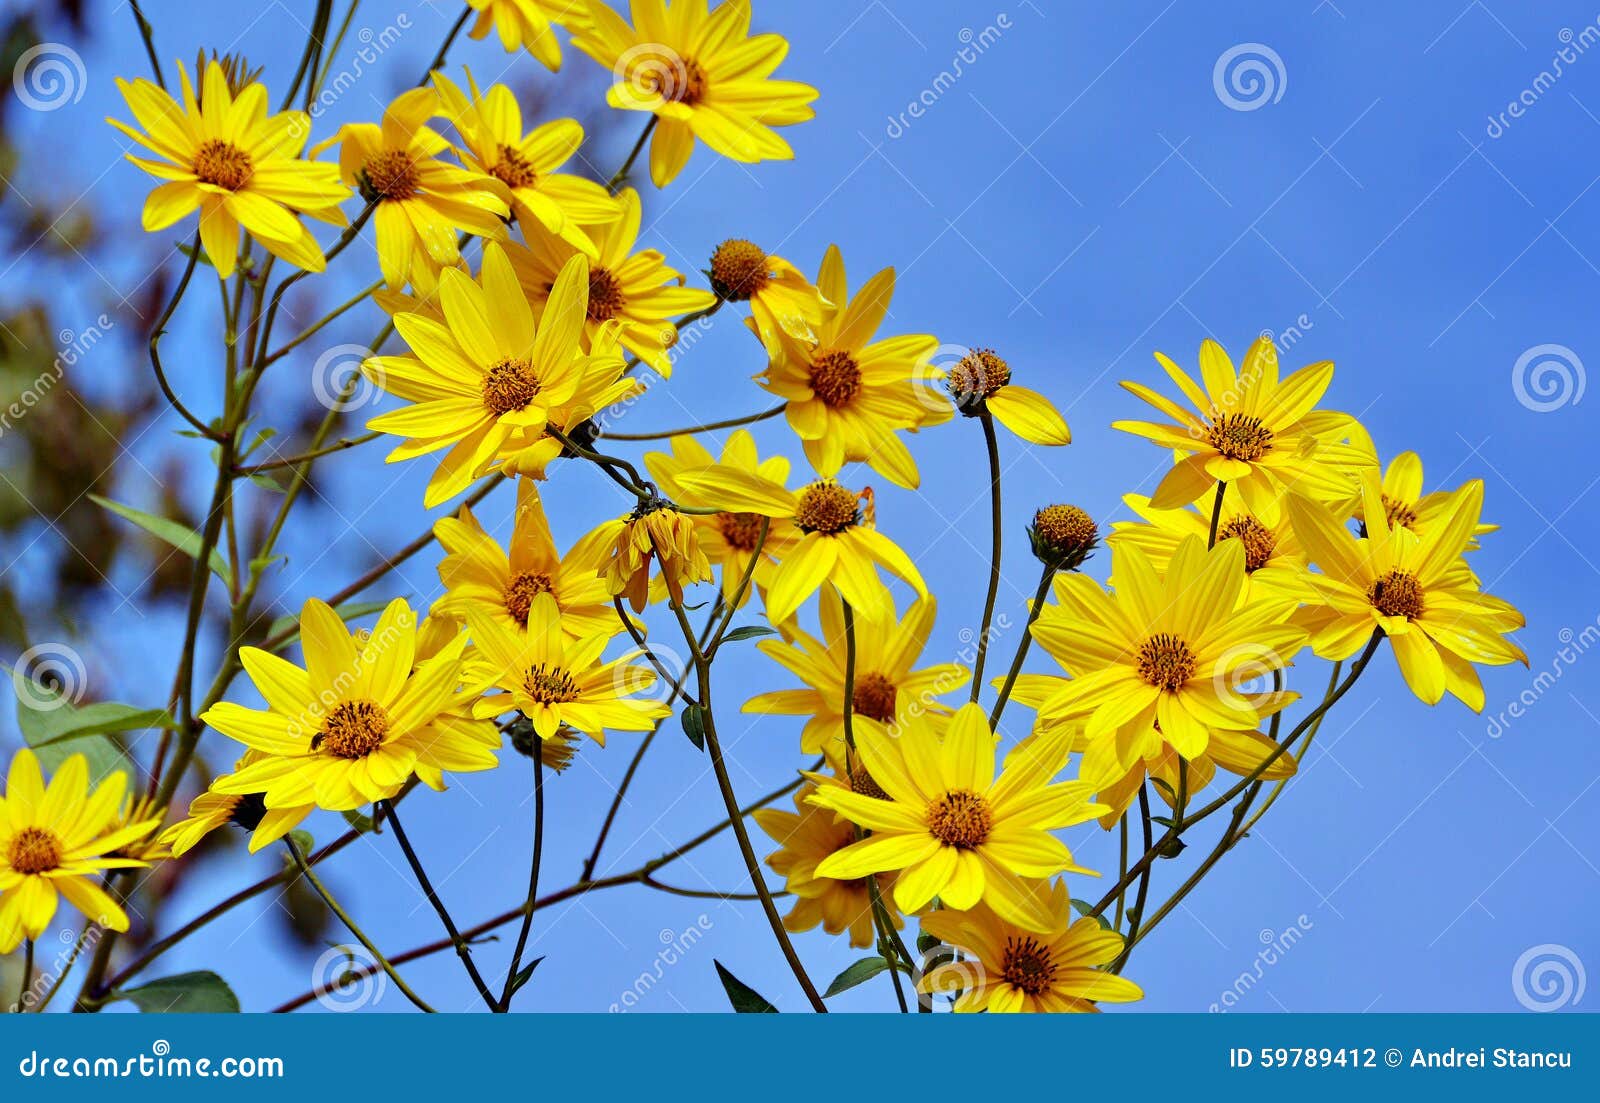 Yellow spring flowers stock photo. Image of flowers, natural - 59789412